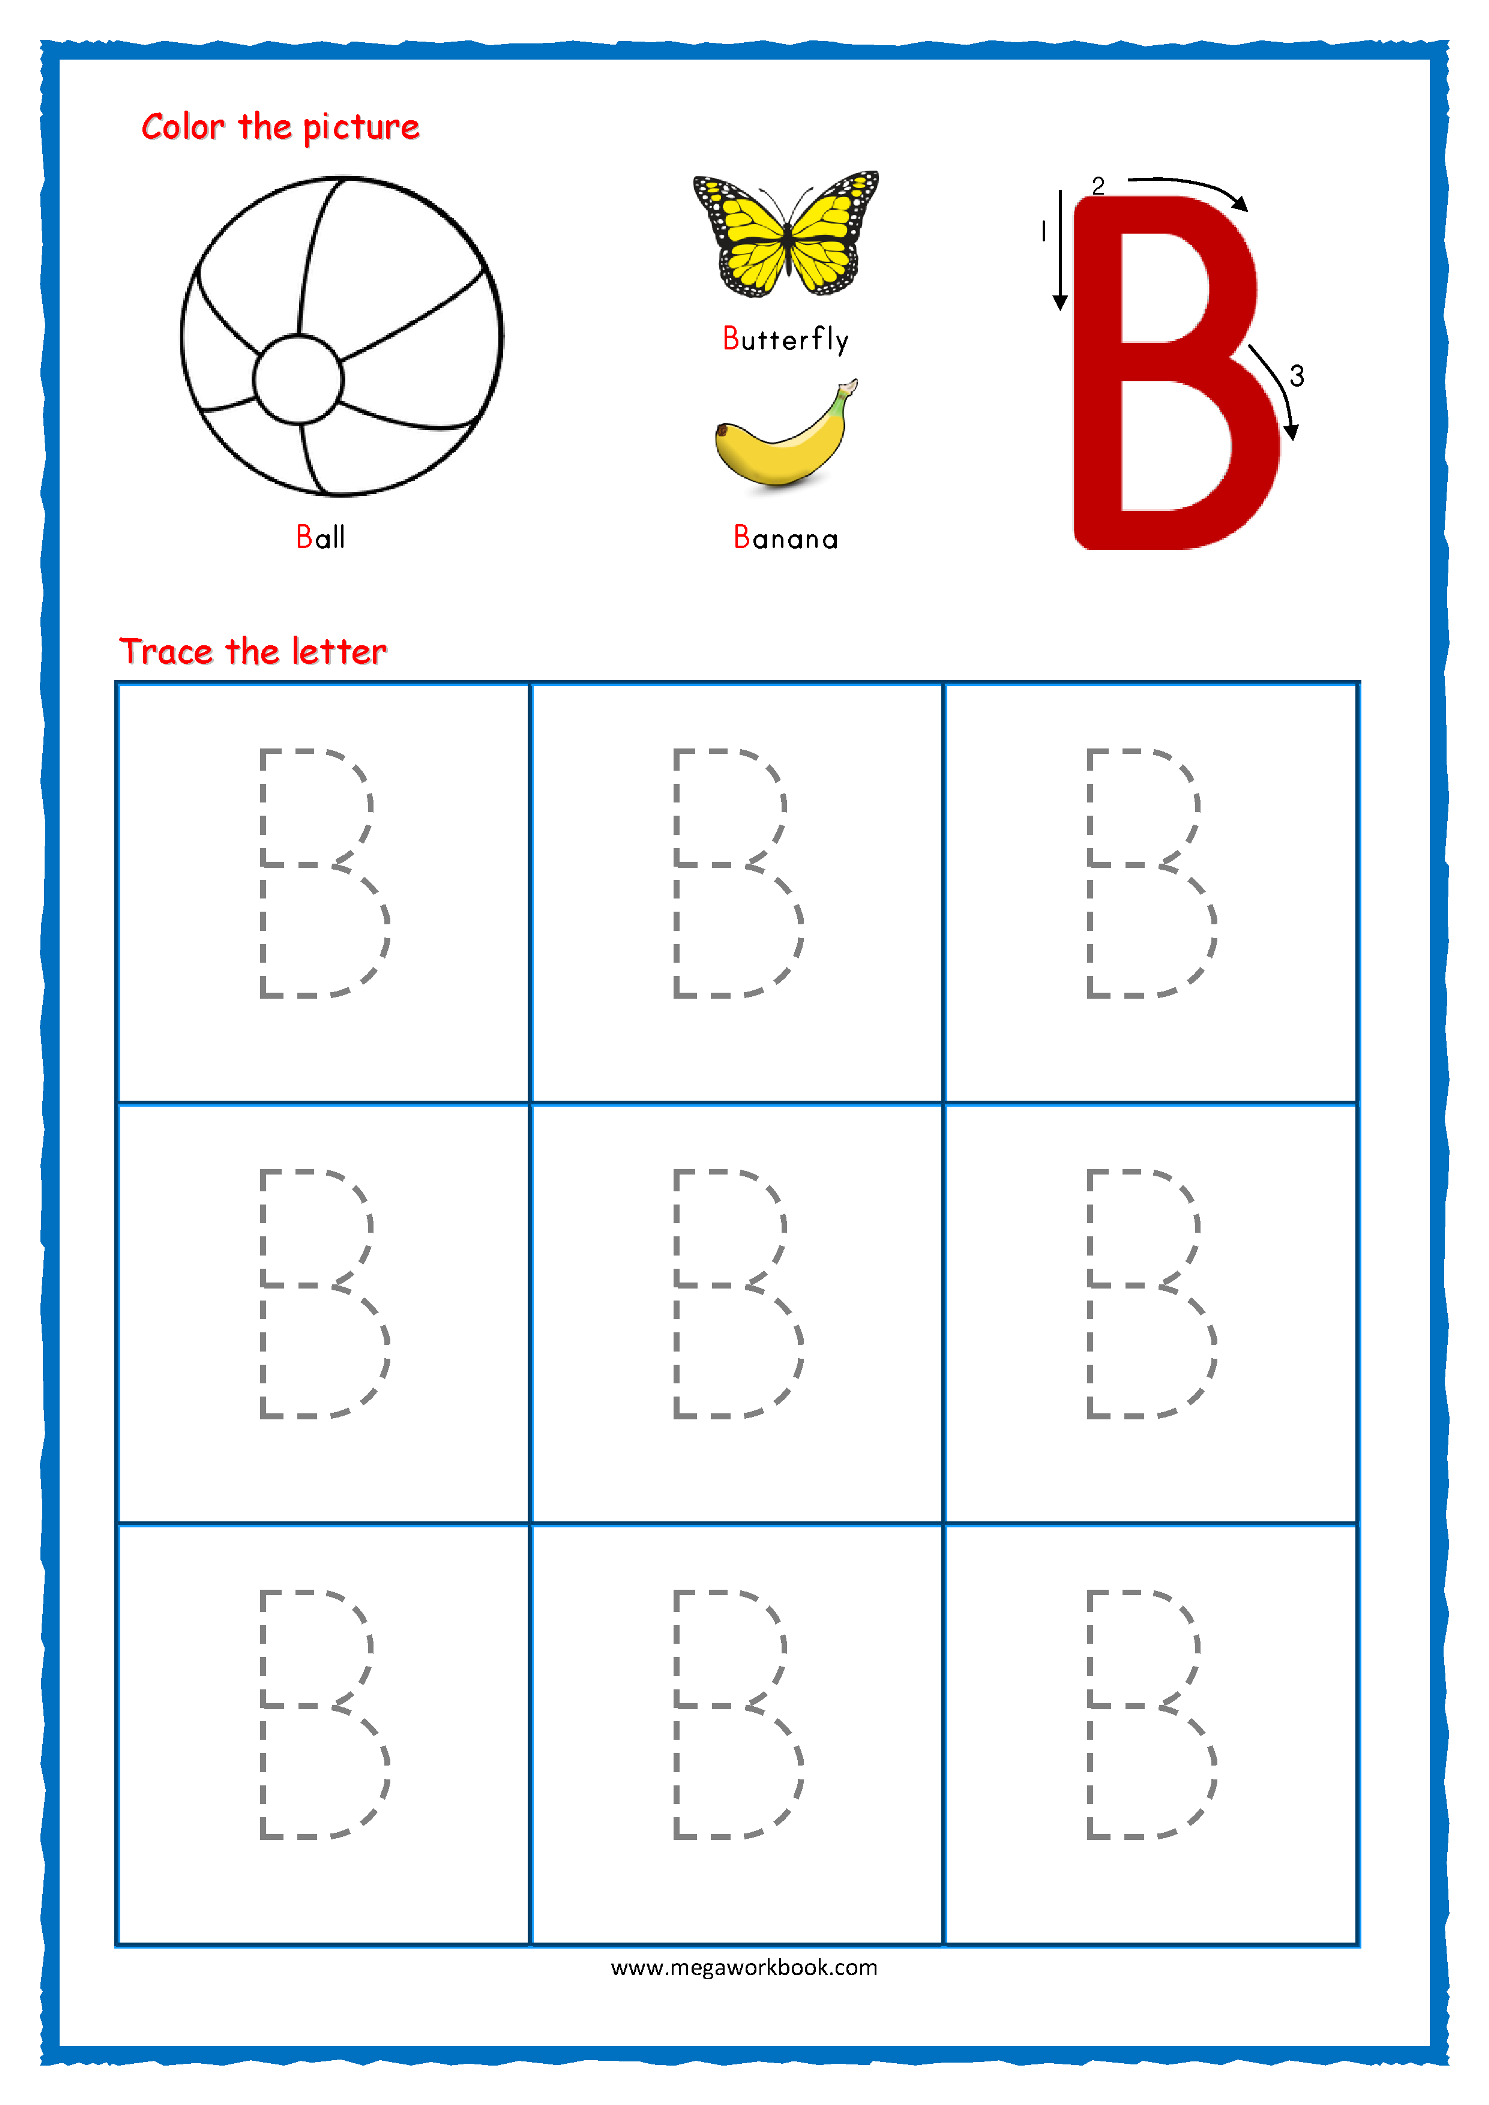 Coloring Book : Letter Tracingts Free Printable Coloring intended for Tracing Letters Worksheets Free Printable